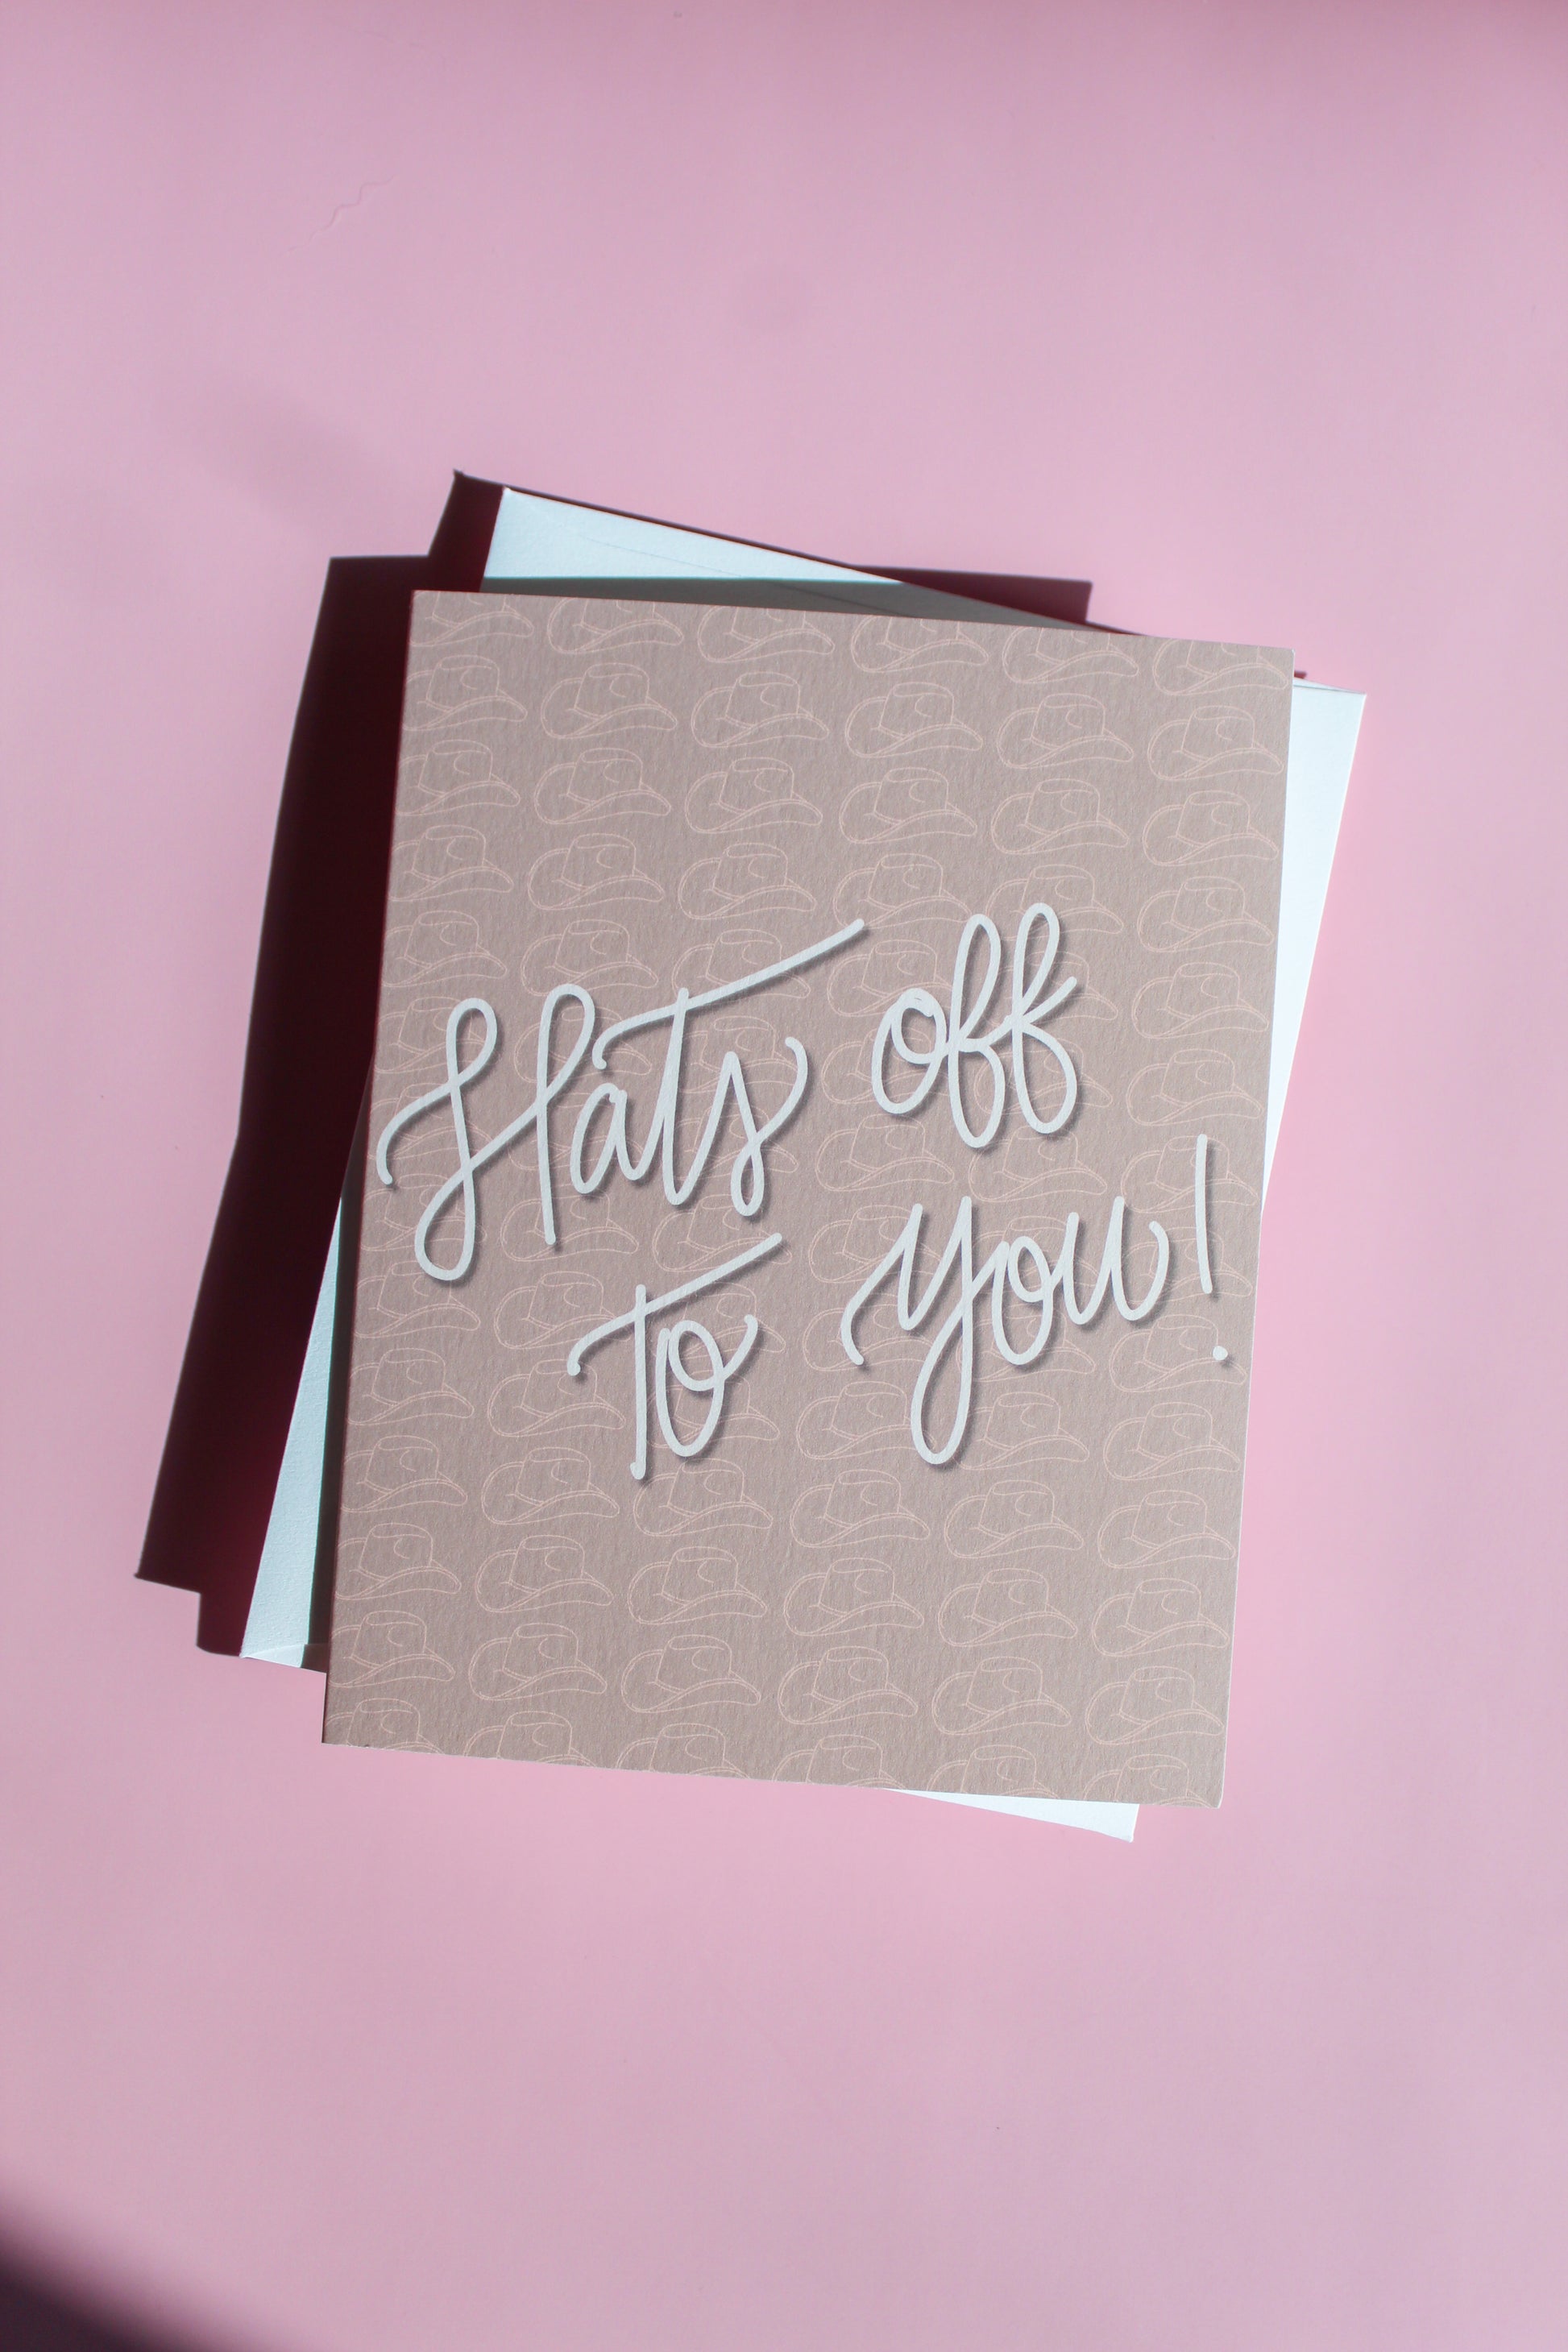 Our "Hats Off To You!" greeting card Each card is folded to 4.25" tall by 5.5" wide, is blank inside and comes with a matching white envelope. Cards are packaged in cellophane sleeves. Perfect way to accent an gift to say congratulations or good luck! 